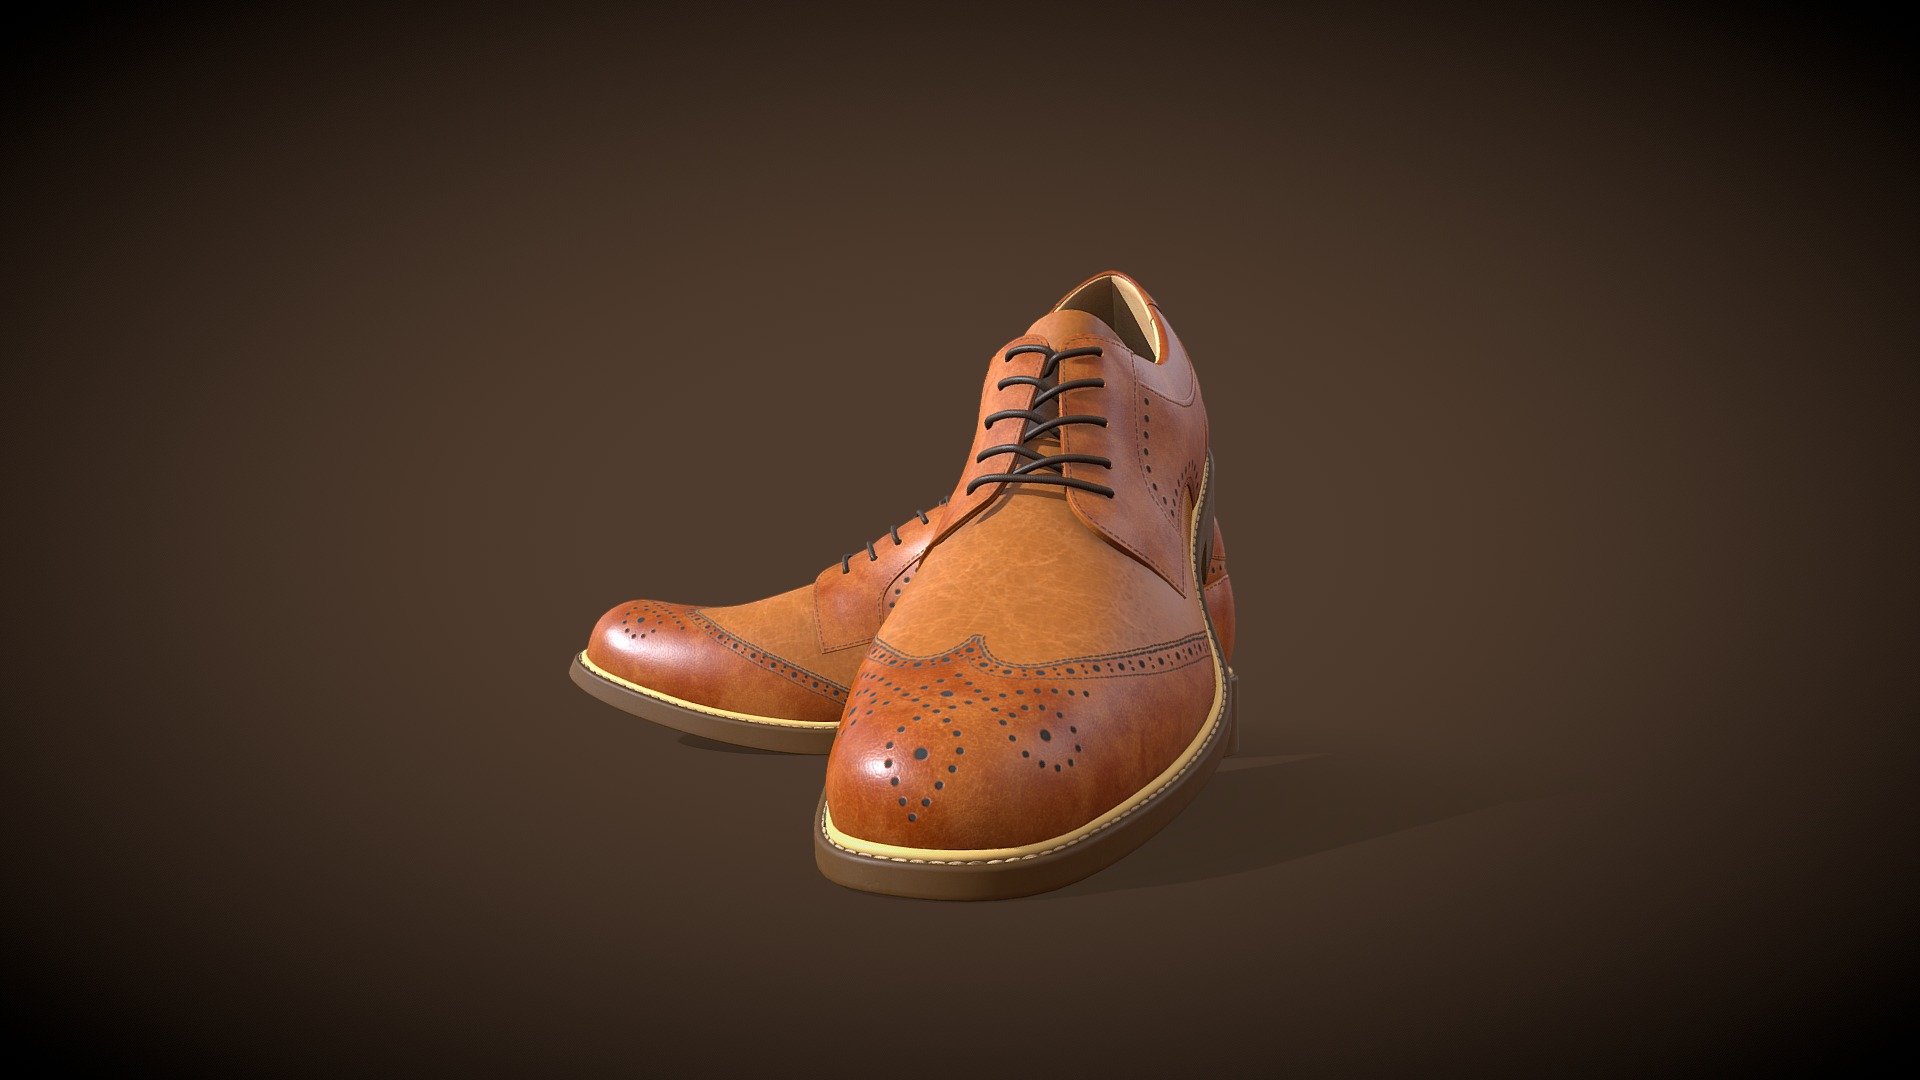 Leather Brown Shoe
Classical style - Leather Brown Shoe - 3D model by vuduytruong3D 3d model